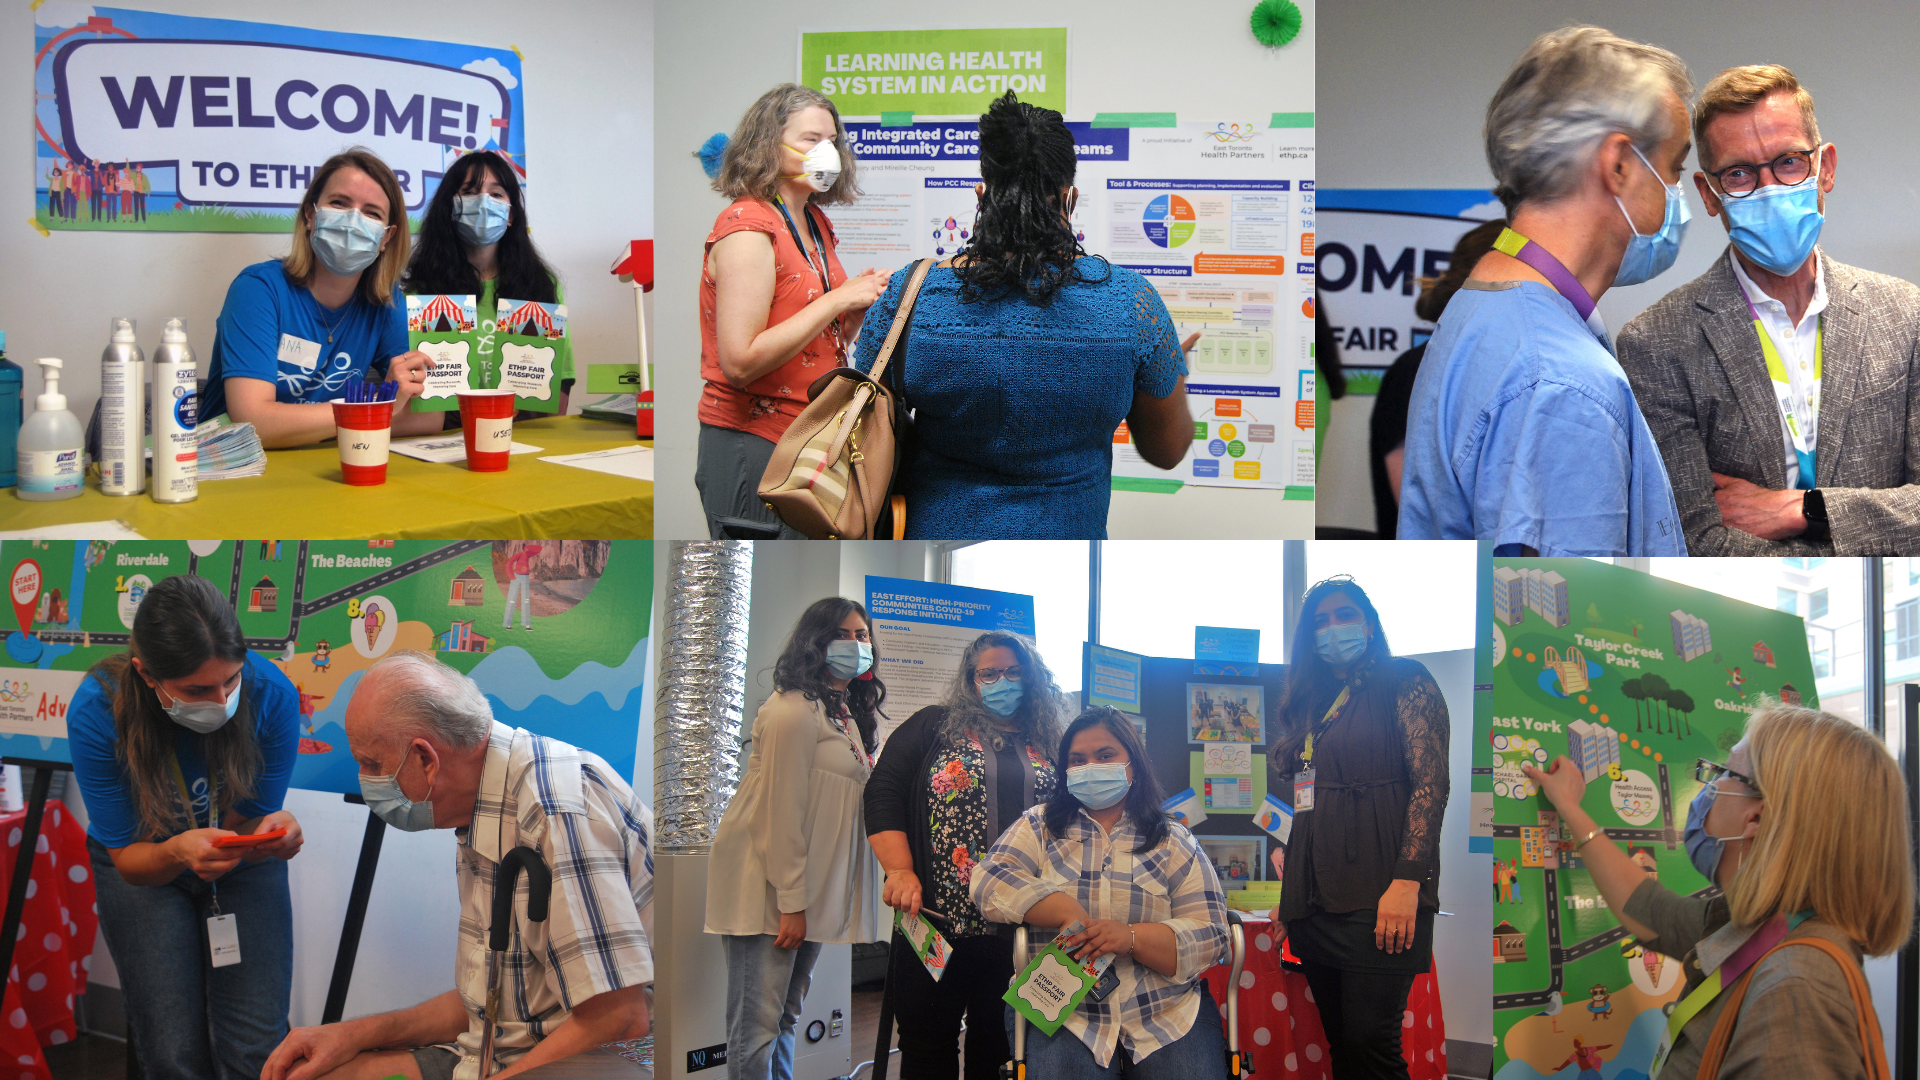 Featured image for “VHA and East Toronto Health Partners Hold Fair-themed Event to Celebrate Research and Quality Improvement Efforts to Improve Care”